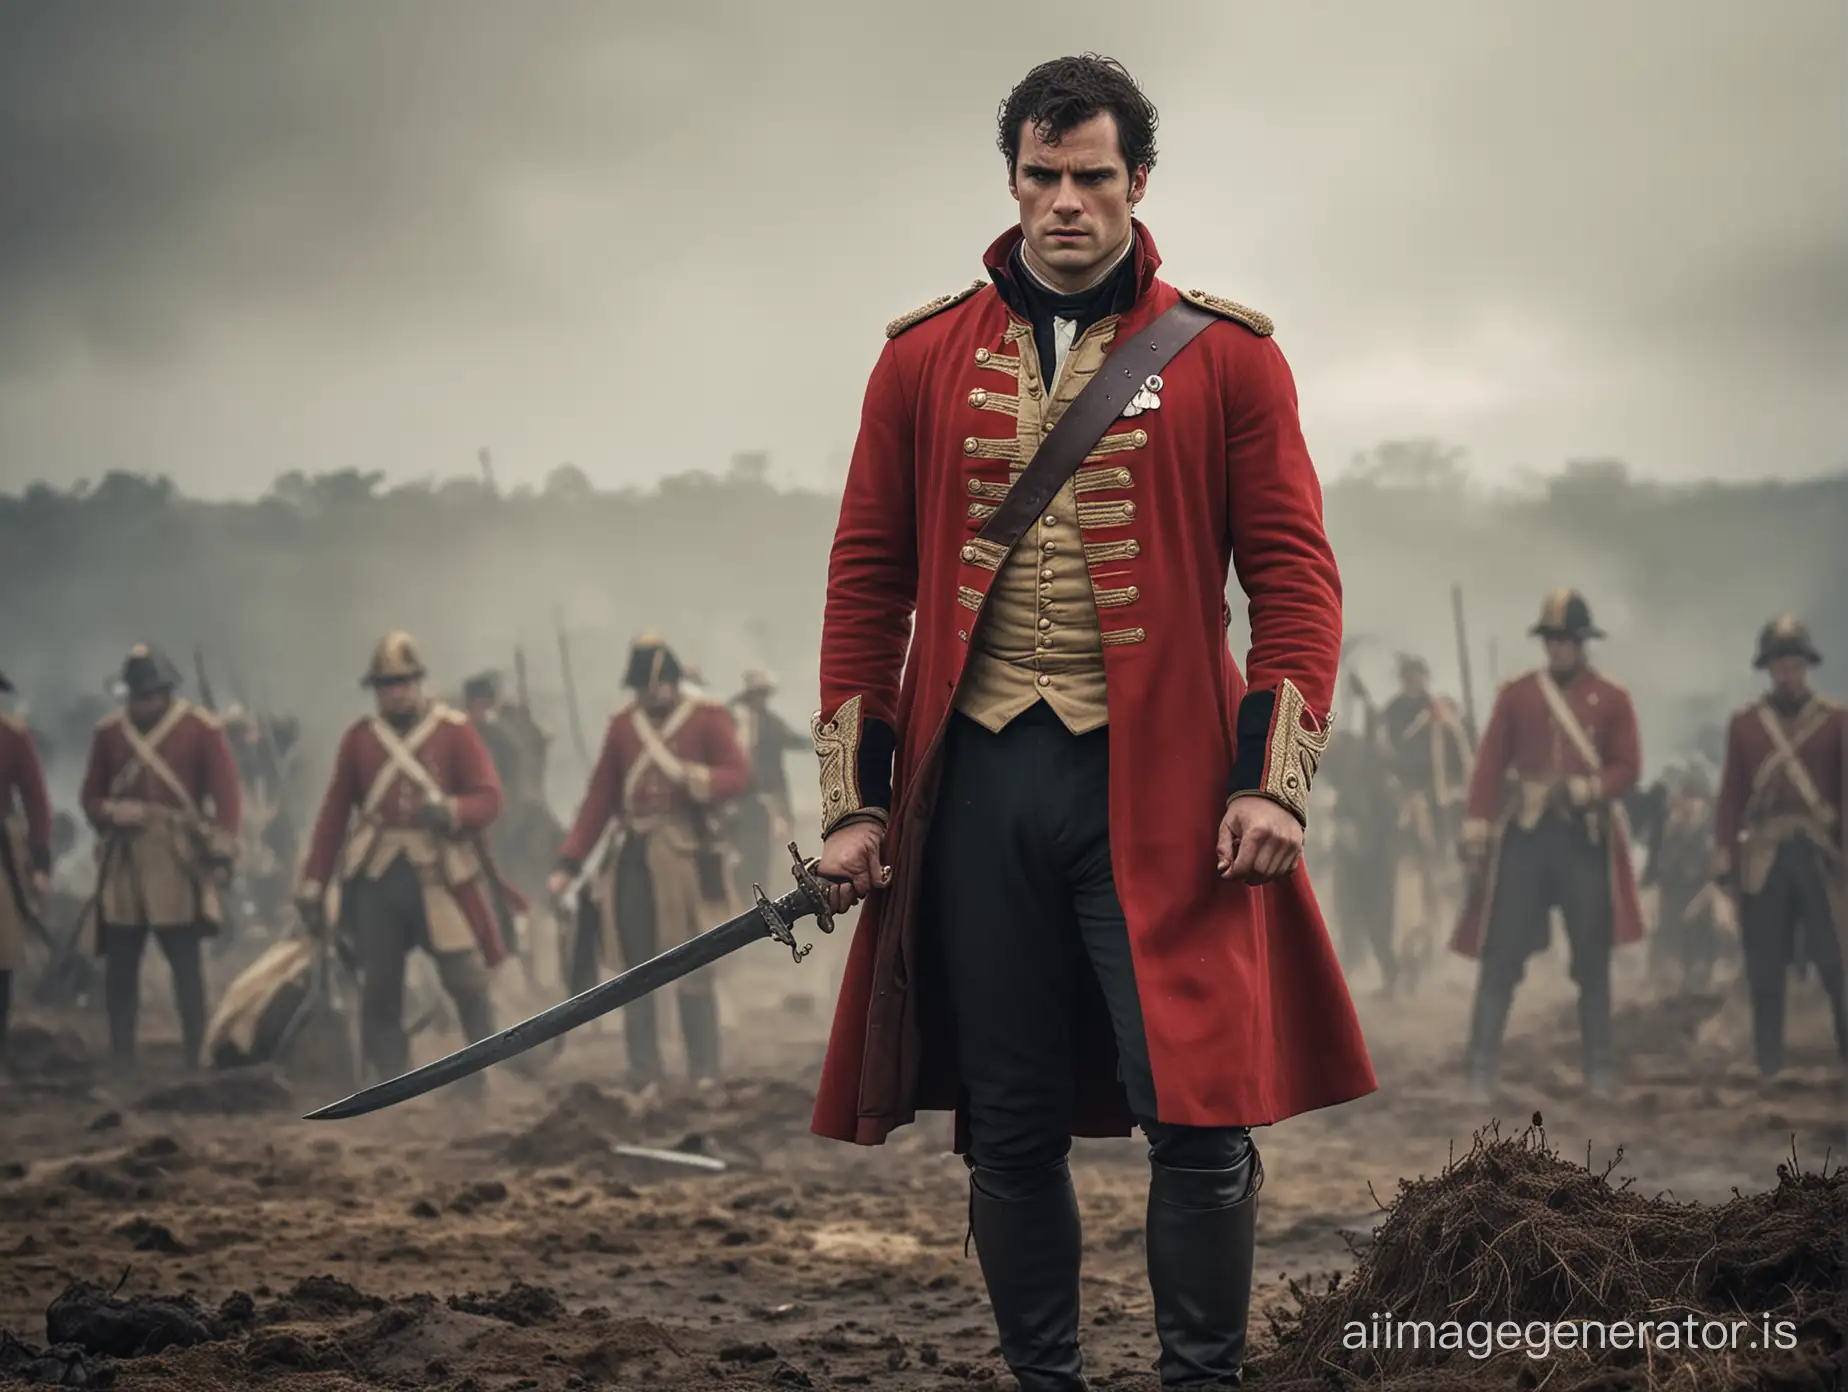 Young and attractive English officer with a red coat uniform, without a hat, resembling actor Henry Cavill, standing on a battlefield, distressed expression, with a small wound on his face and a sword in his hand with the tip resting on the ground, during the Regency period